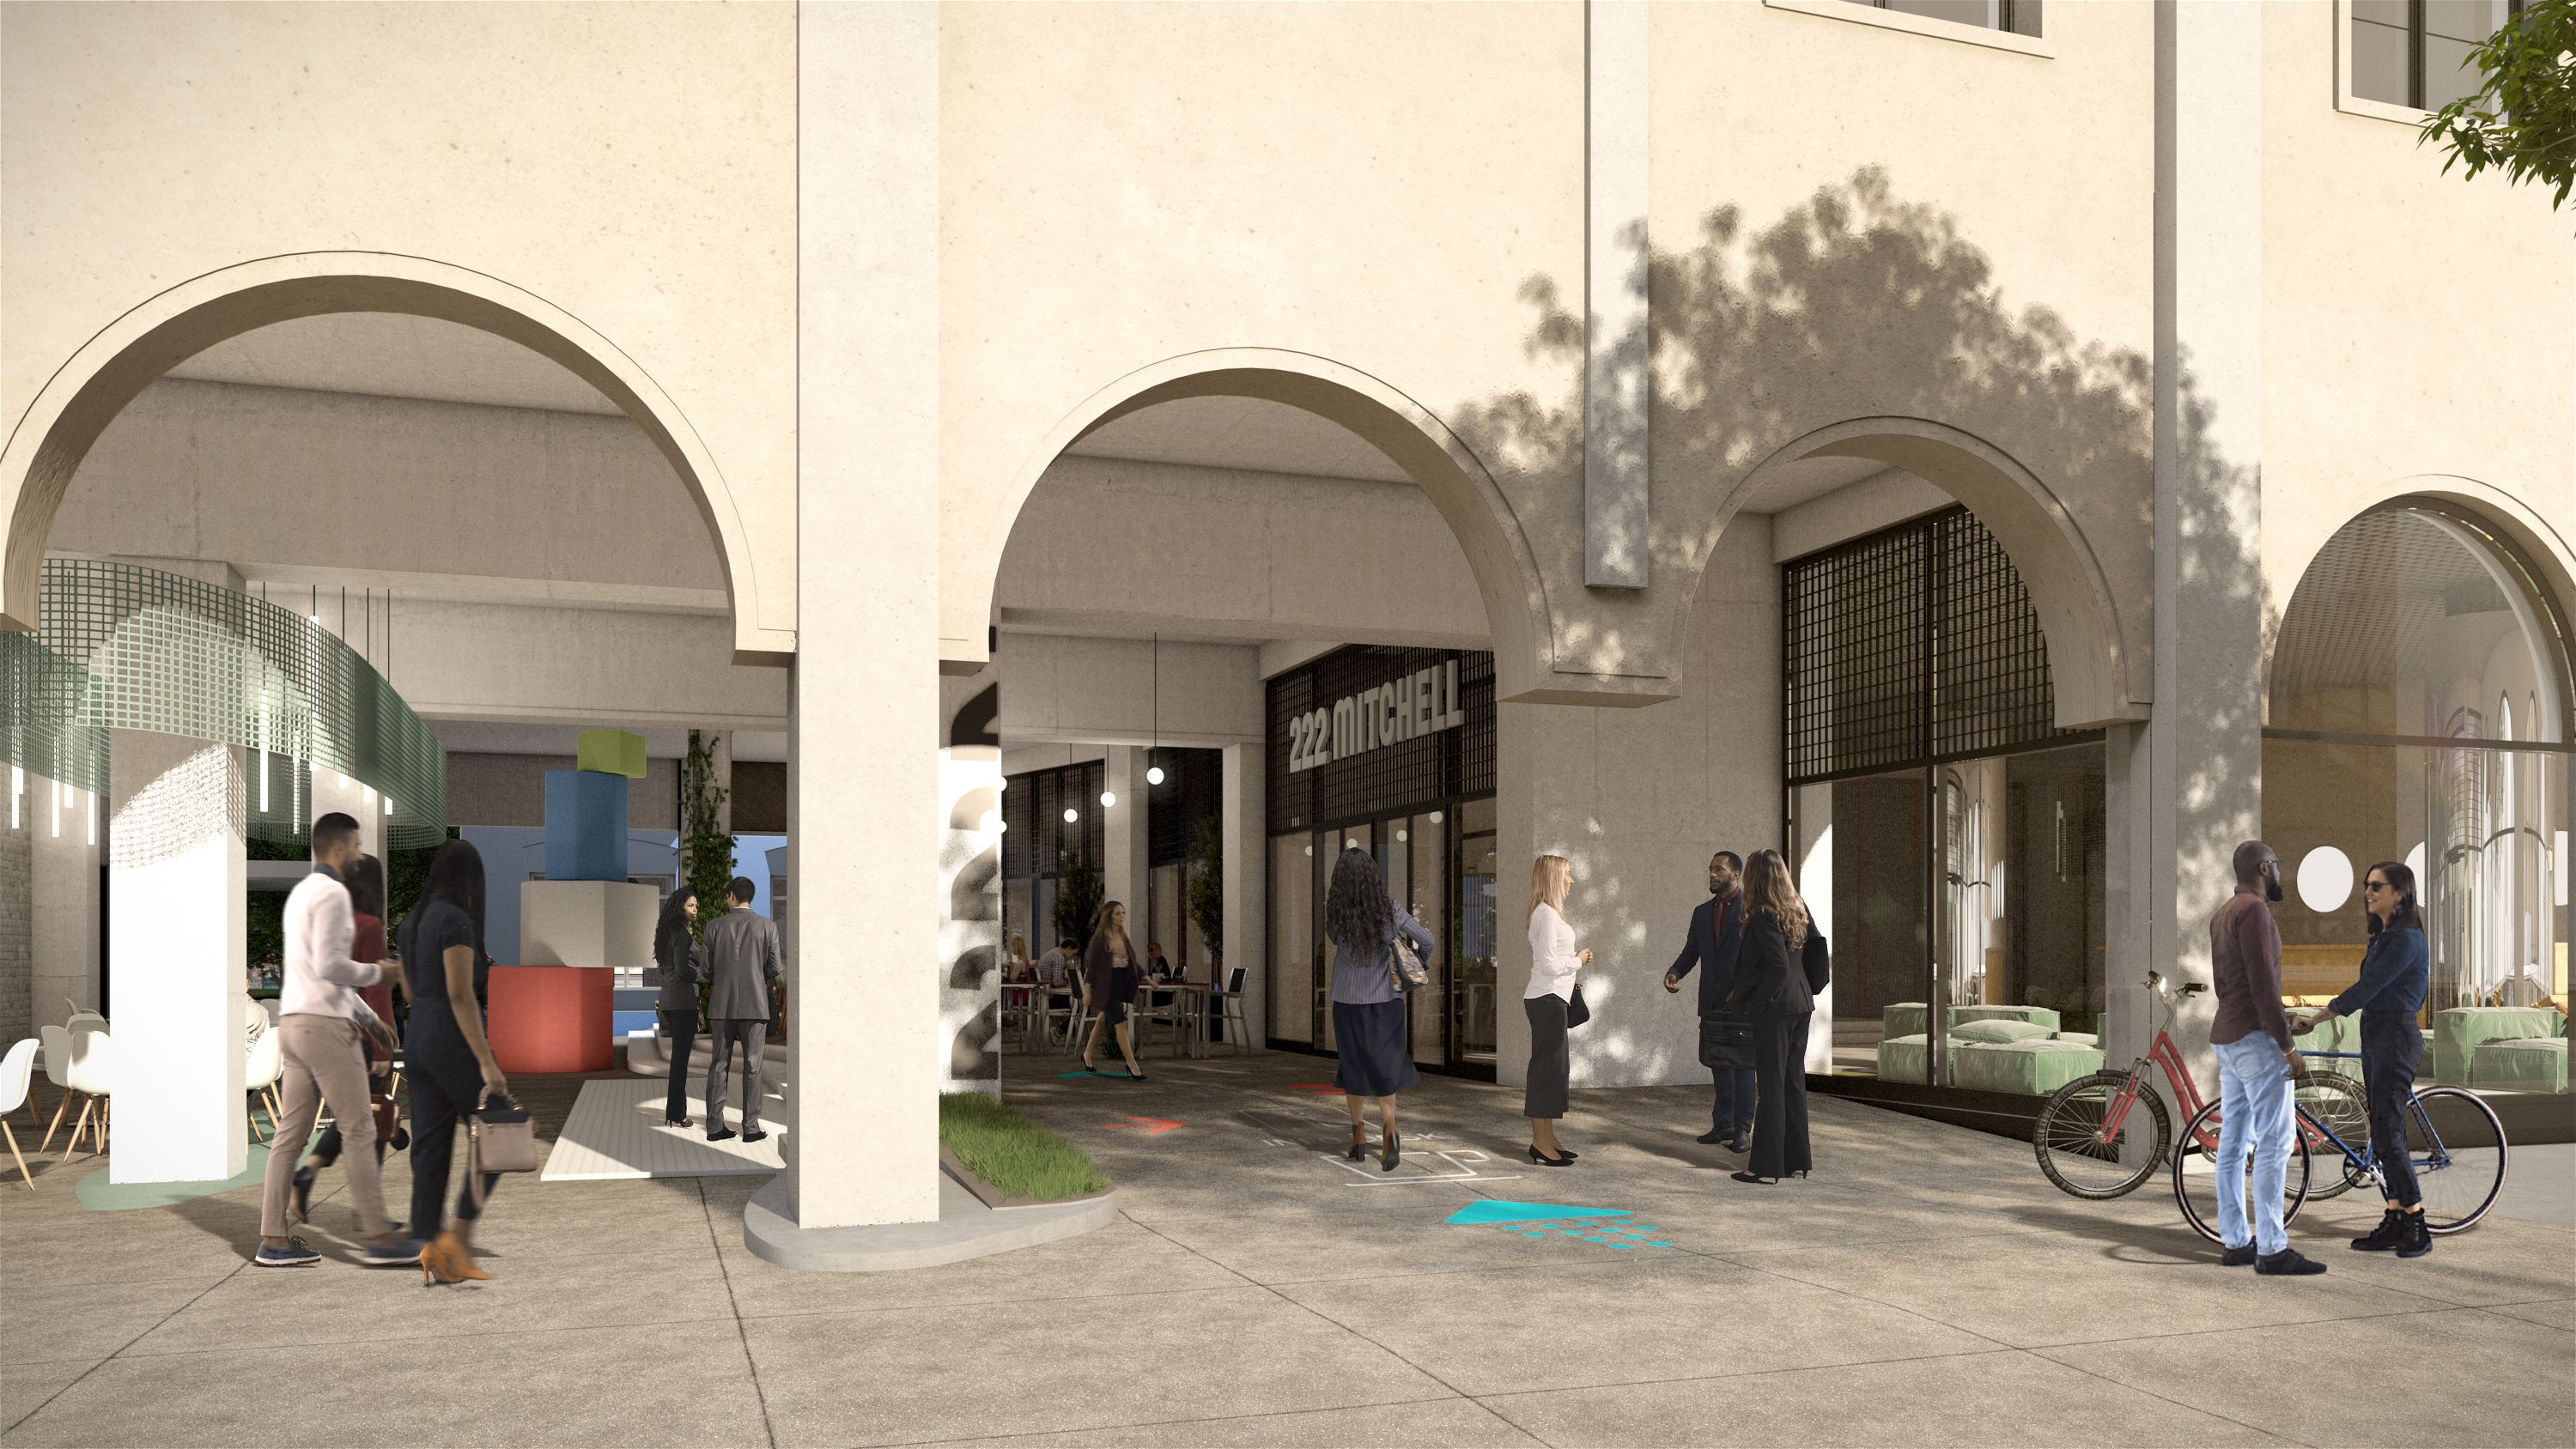 A rendering of the new facade with large archways at the redeveloped 222 Mitchell Street, a former bank building turned into retail and offices